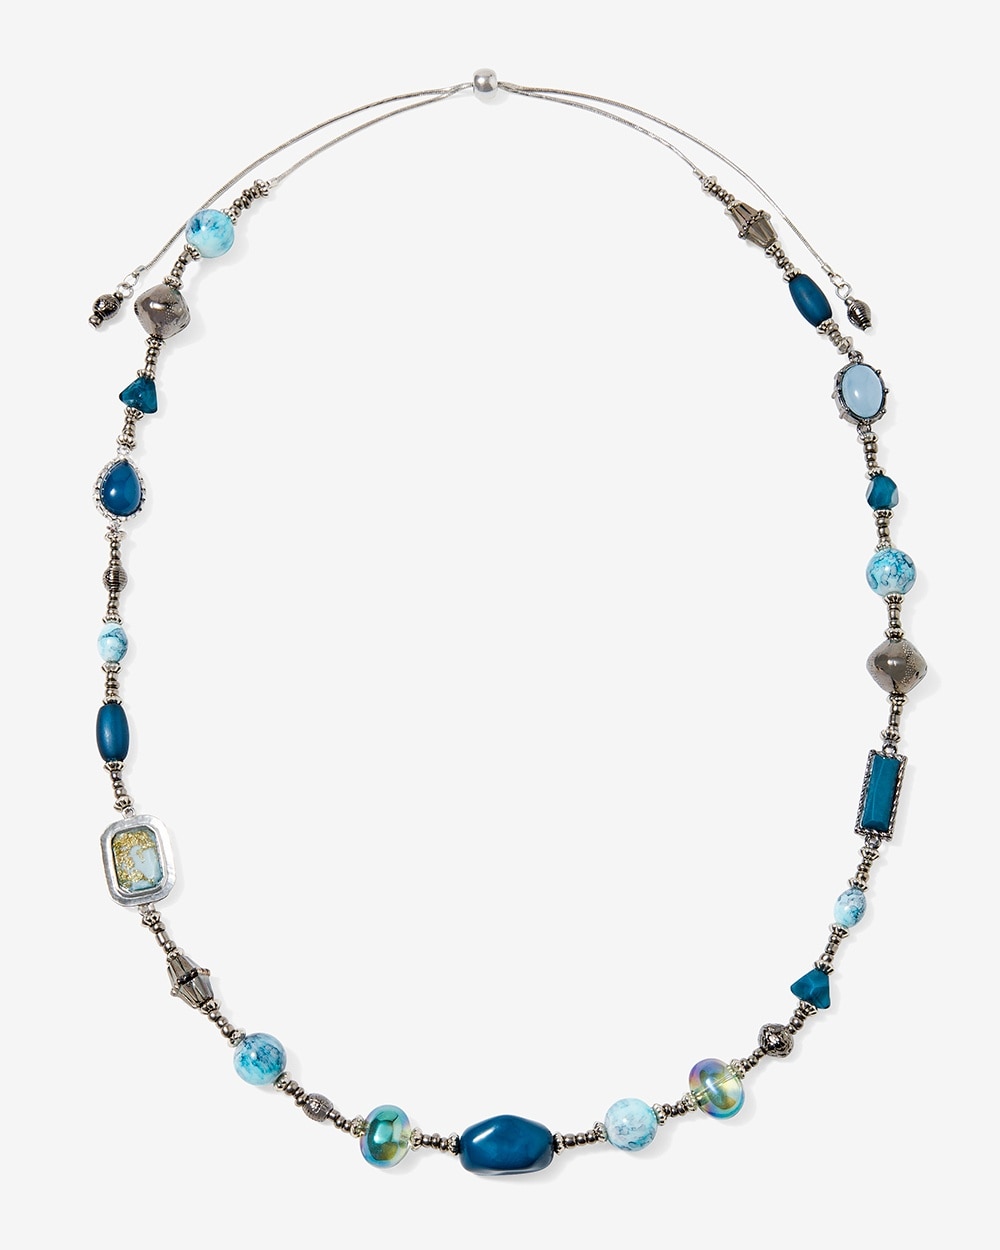 Adjustable Eclectic Beaded Necklace